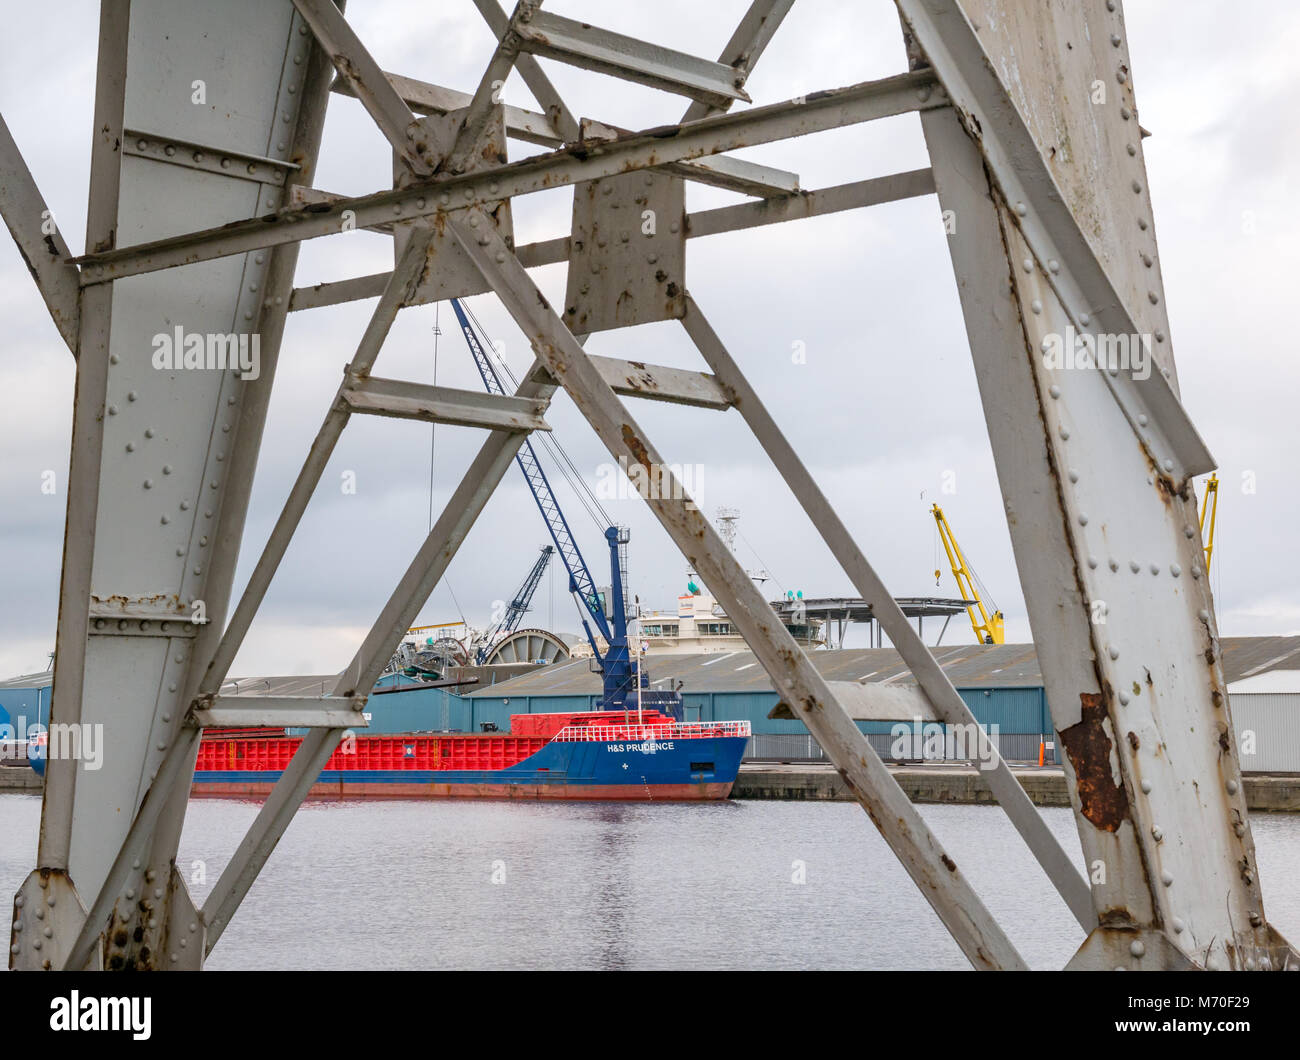 Looking through old Stothert and Pitt disused cranes to supply ships moored in port, Leith Dock, Edinburgh, Scotland, UK Stock Photo